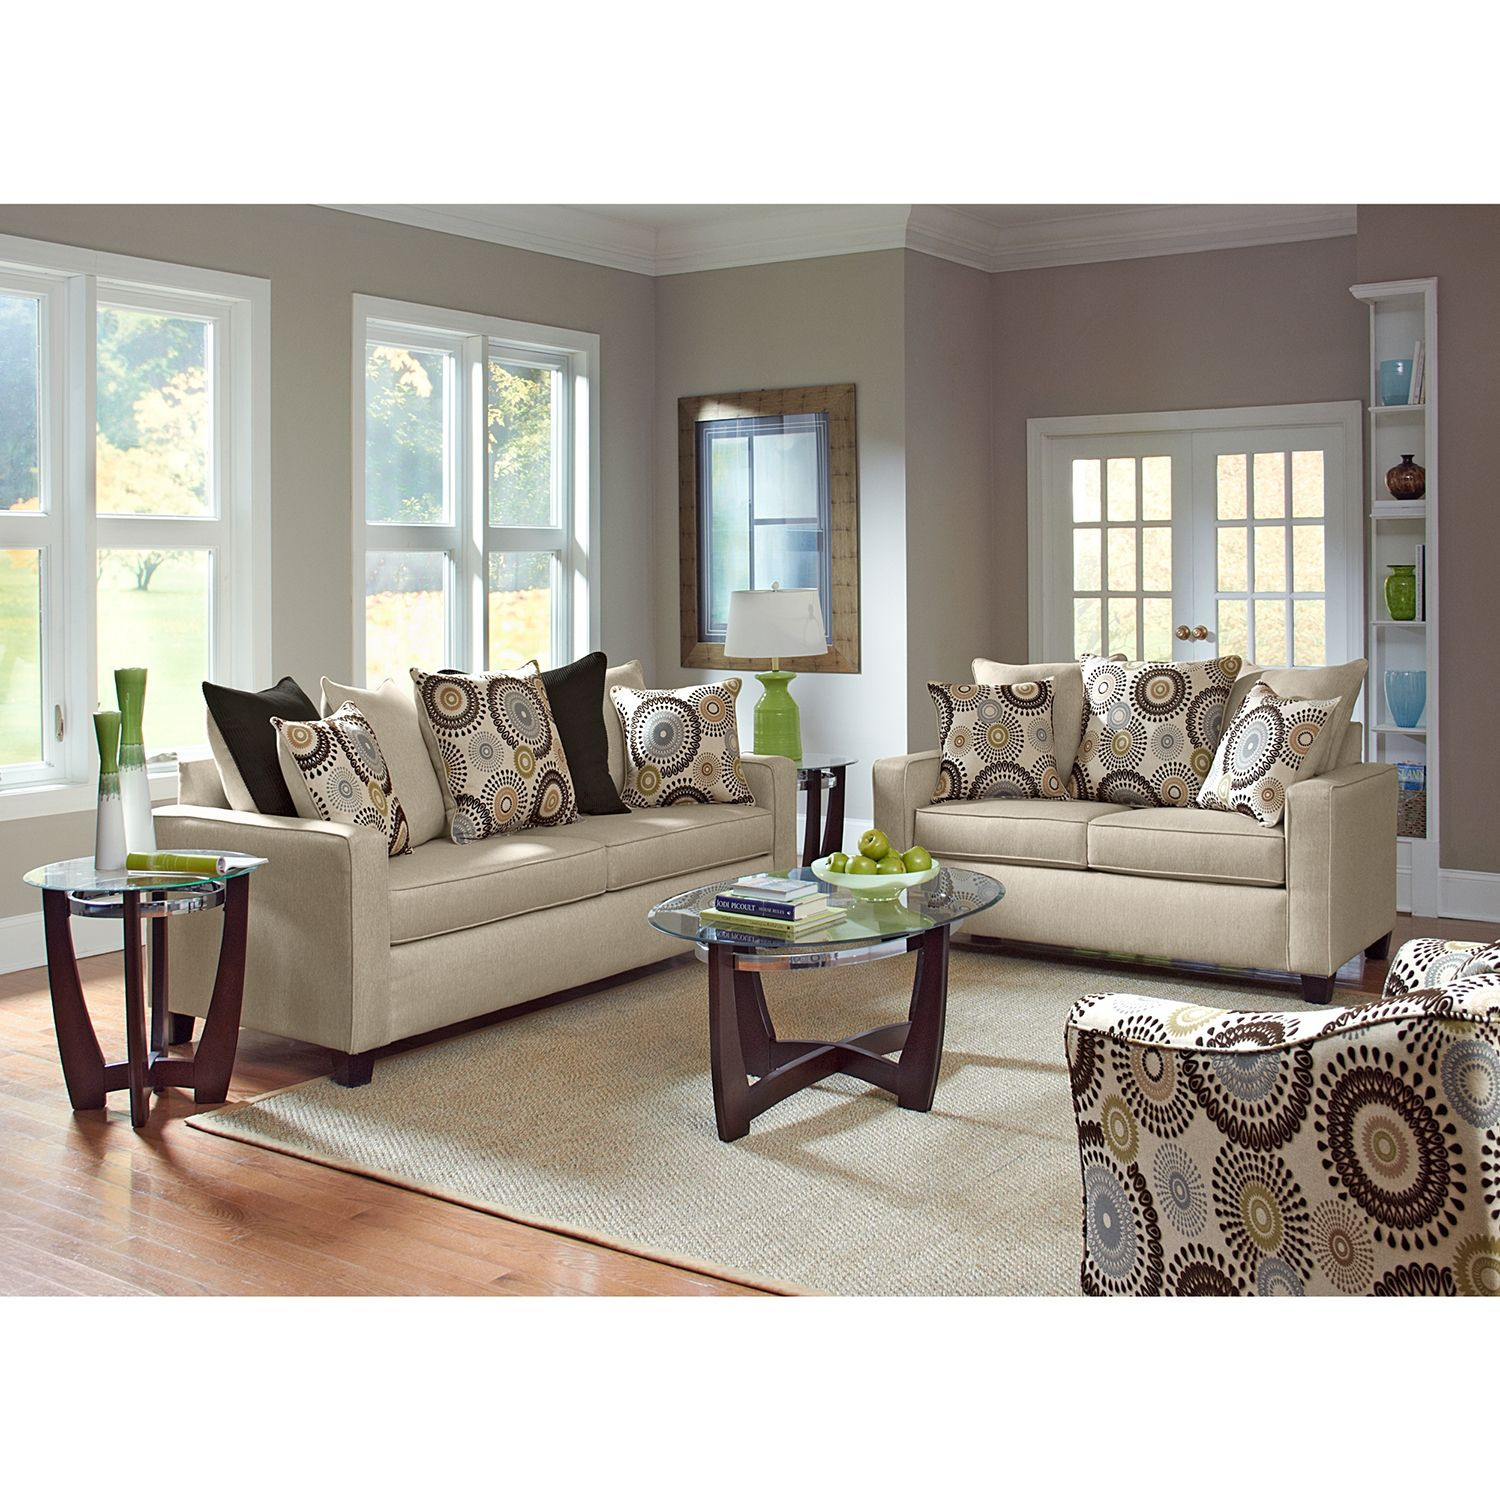 Value City Living Room Tables
 Stoked Upholstery 3 Pc Living Room Value City Furniture